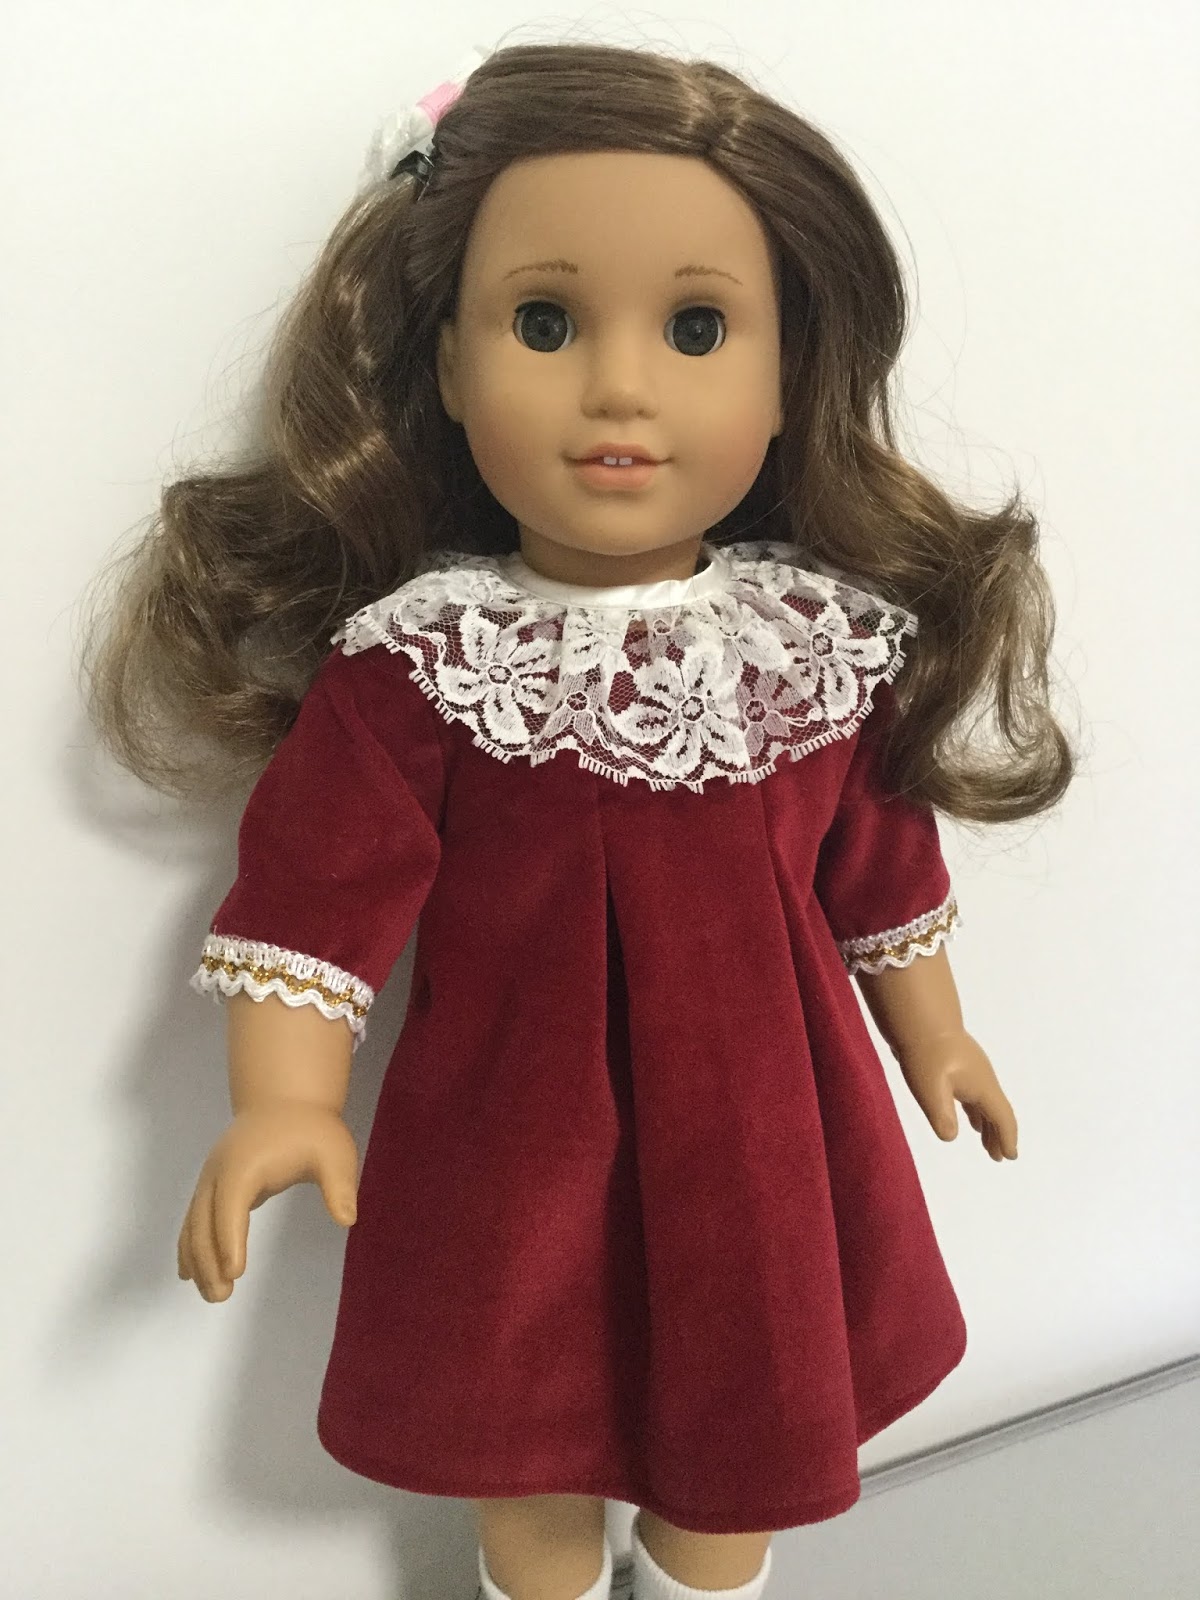 Doll Clothes Patterns by Valspierssews: Do you wash your doll clothes?